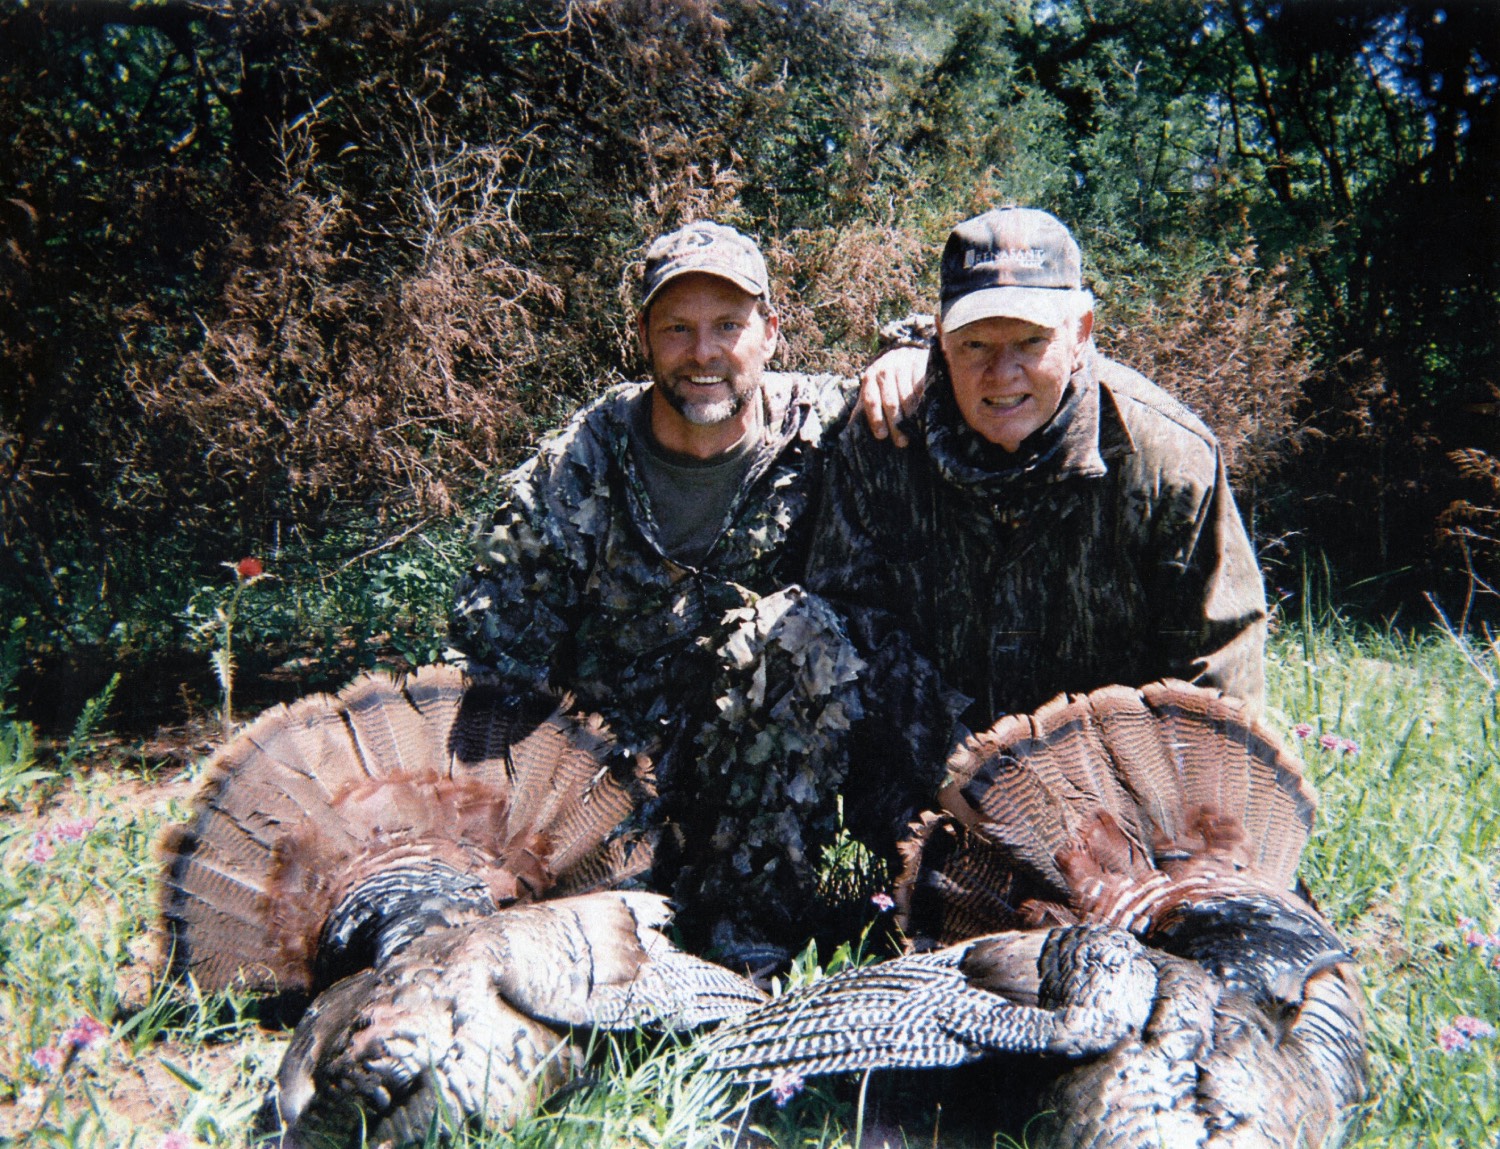 Toxey and Fox Haas pose with two turkeys